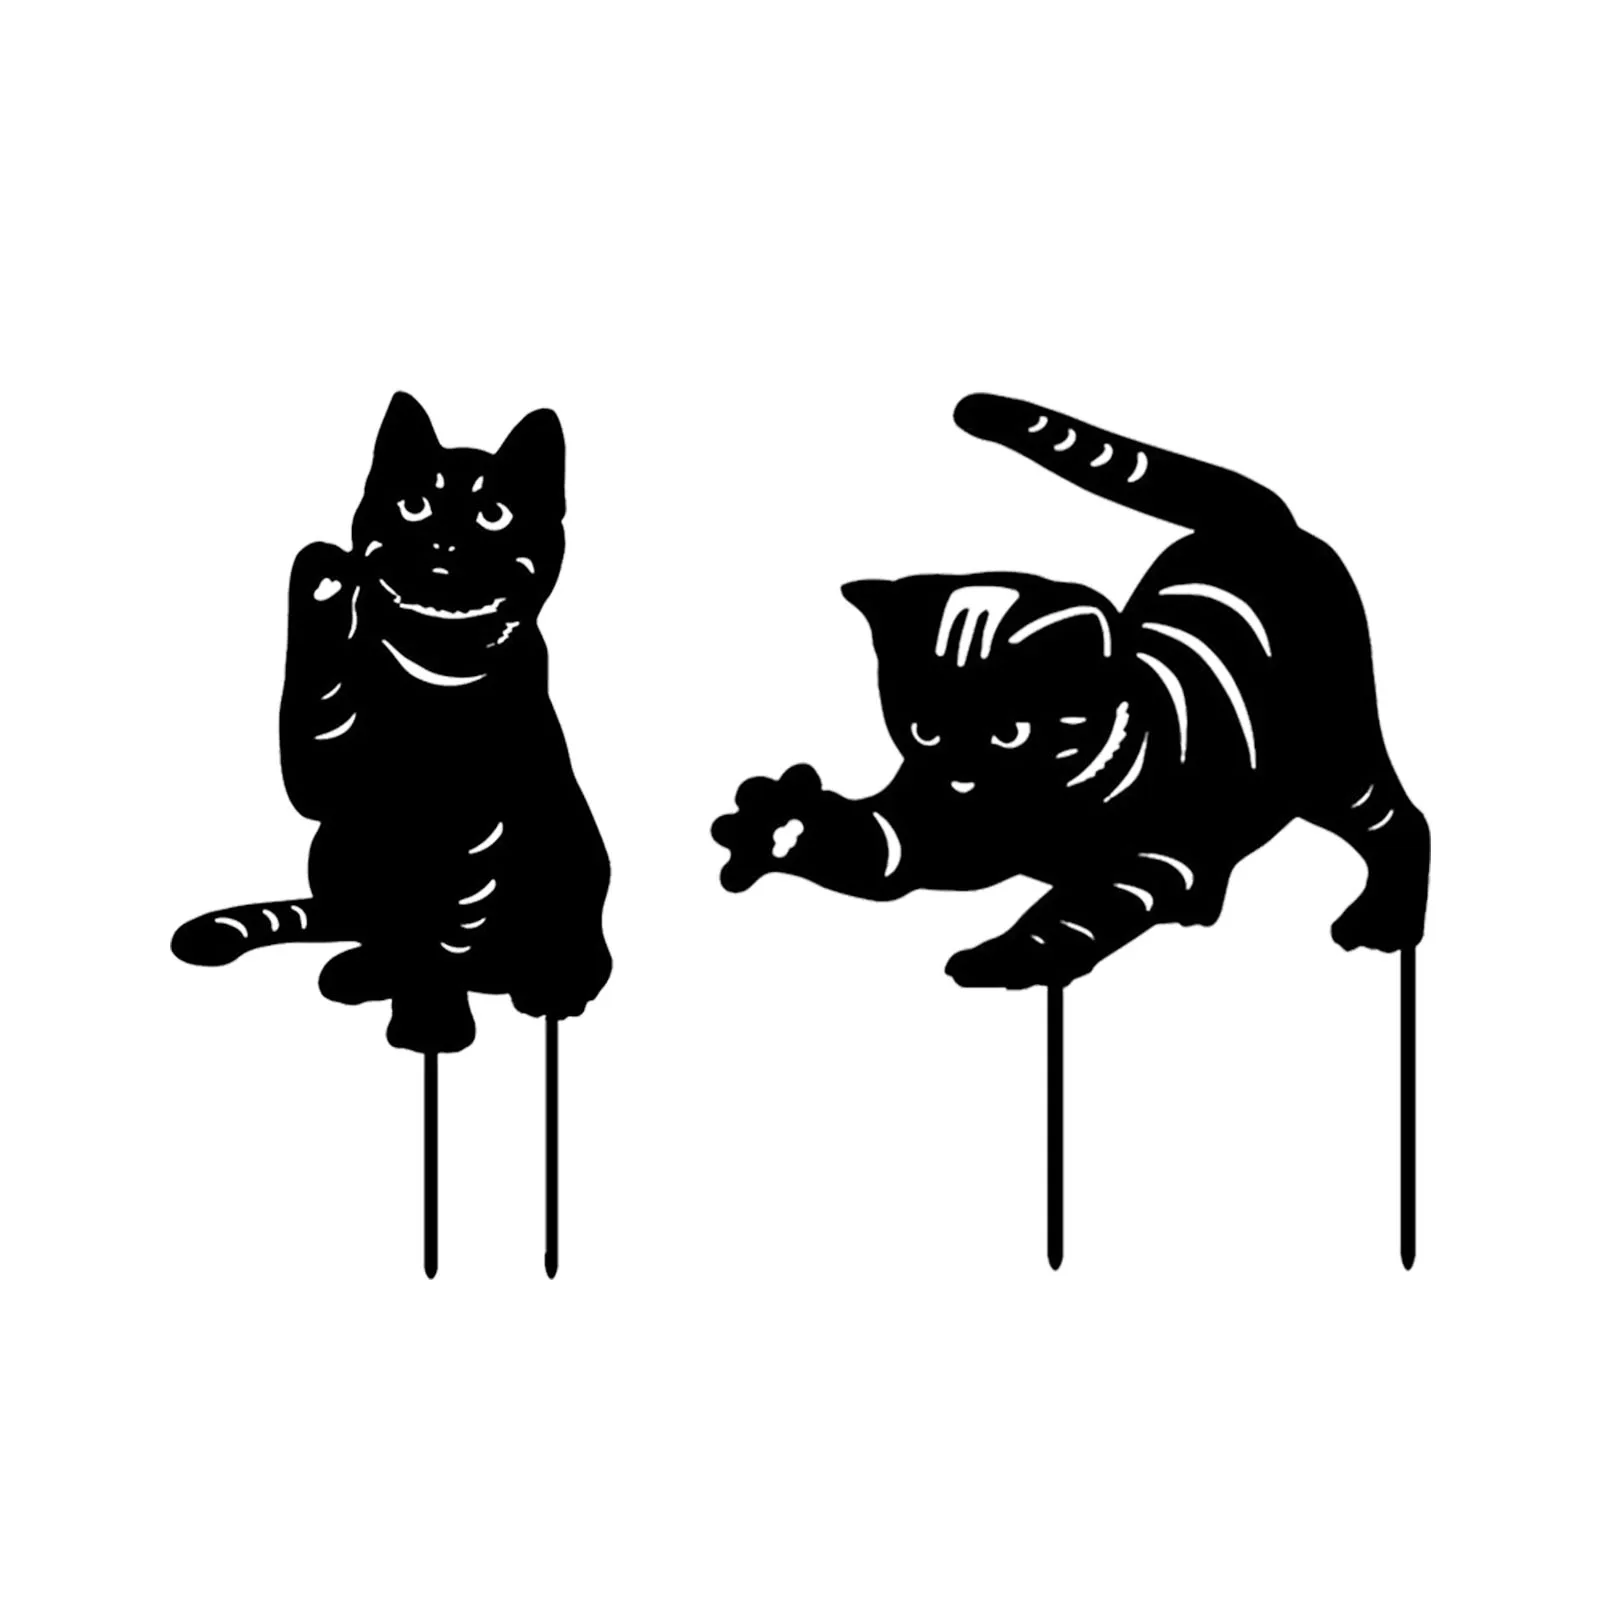 

2pcs Lawn Sign Lifelike Display Outdoor Home Decor Easy Install Waterproof Gift Garden Stakes Art Craft Acrylic Animal Black Cat